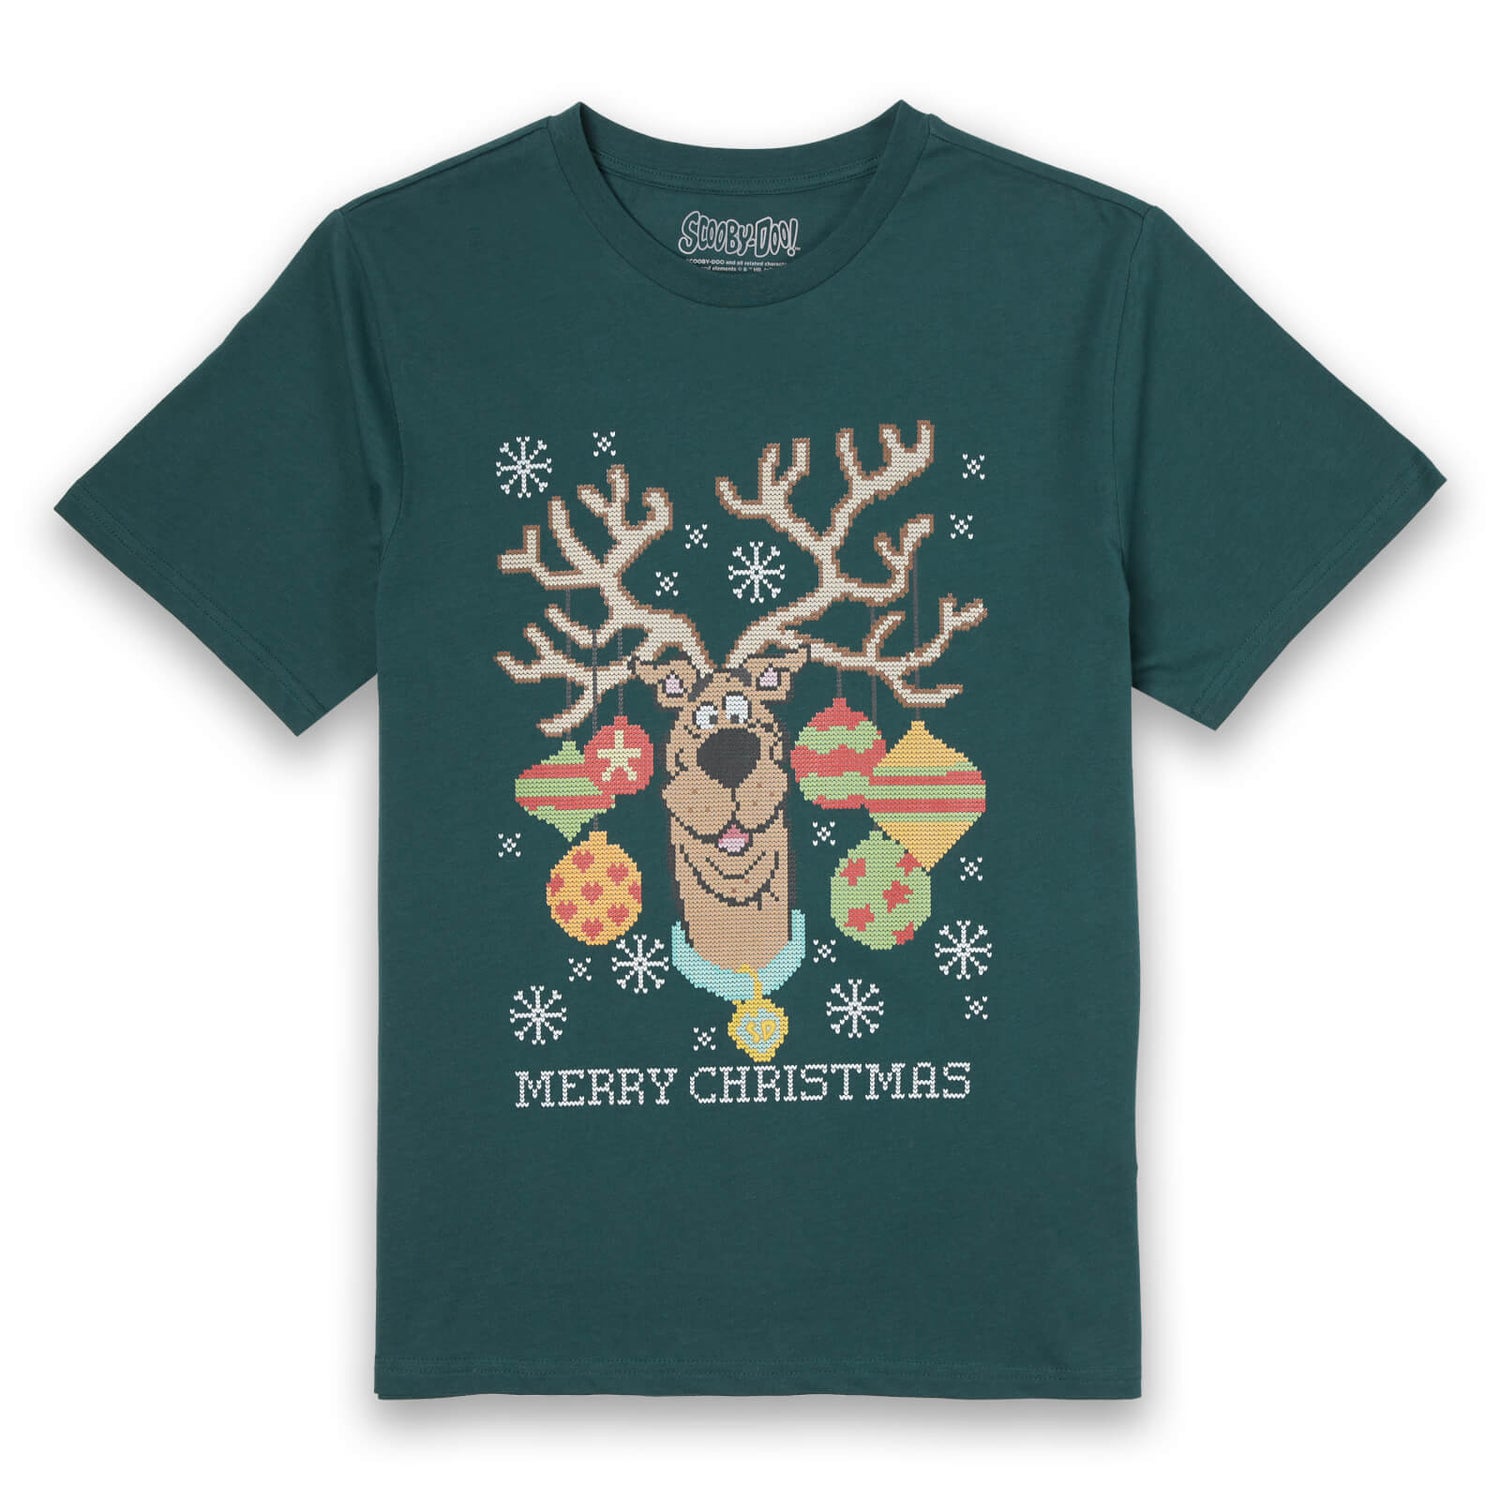 Scooby Doo Men's Christmas T-Shirt - Forest Green